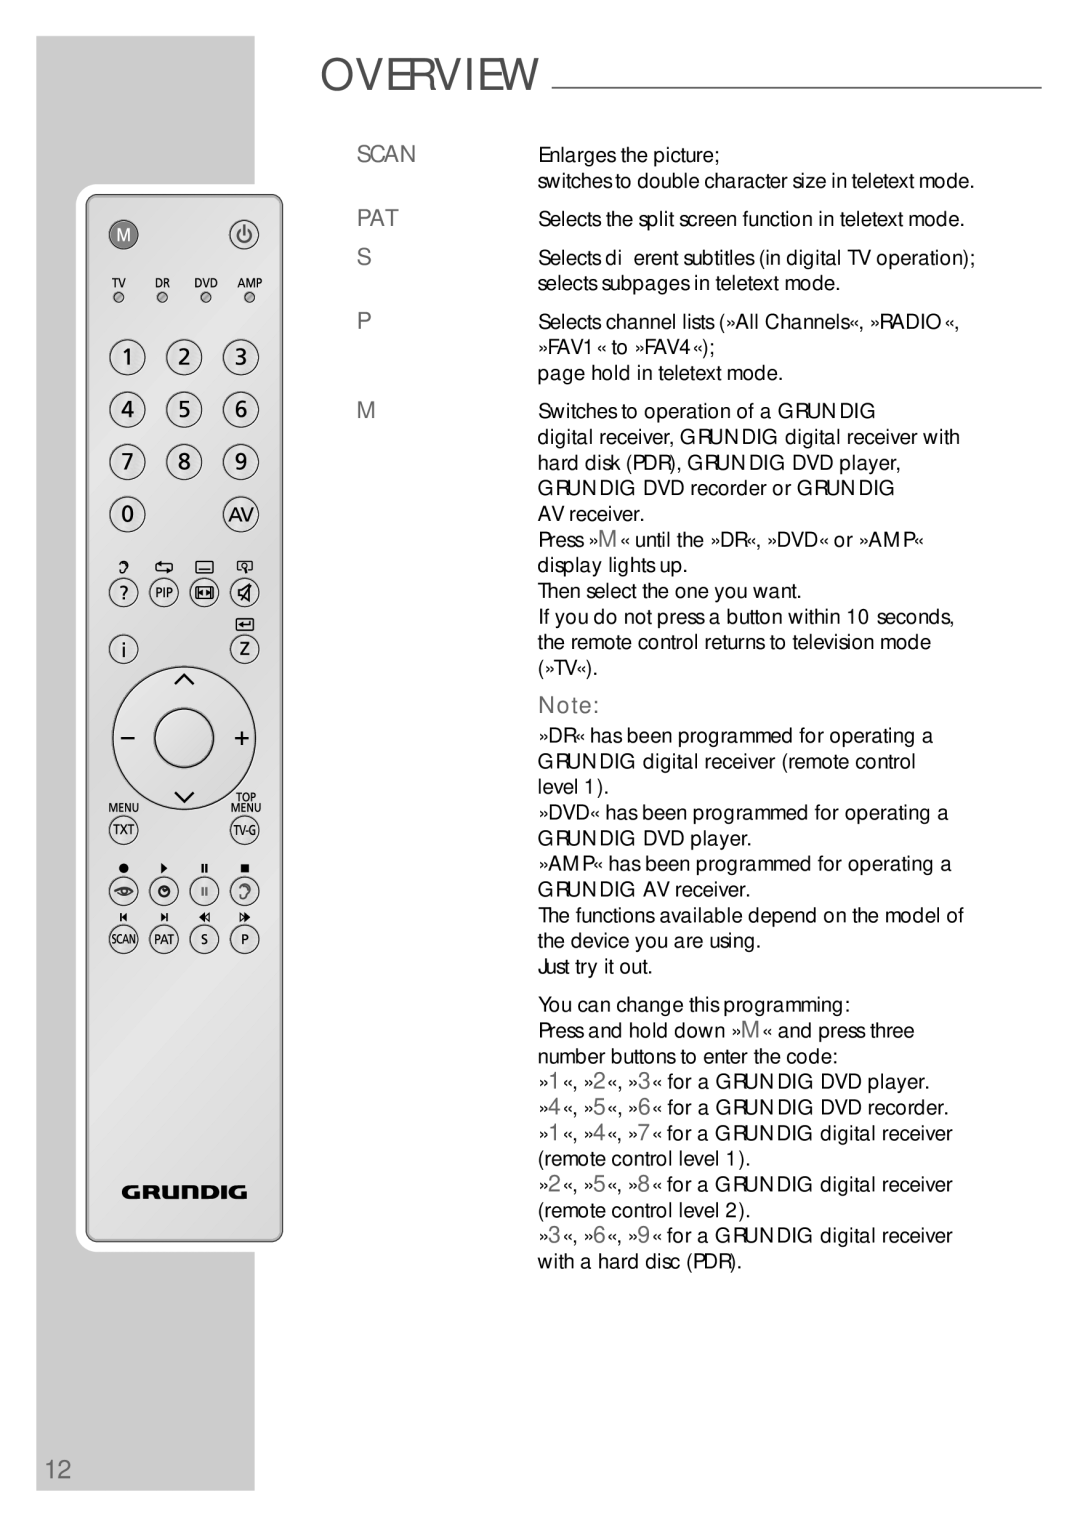 Grundig VISION 7 42-7952 T Enlarges the picture, Selects subpages in teletext mode, »FAV1« to »FAV4«, AV receiver, »Tv« 